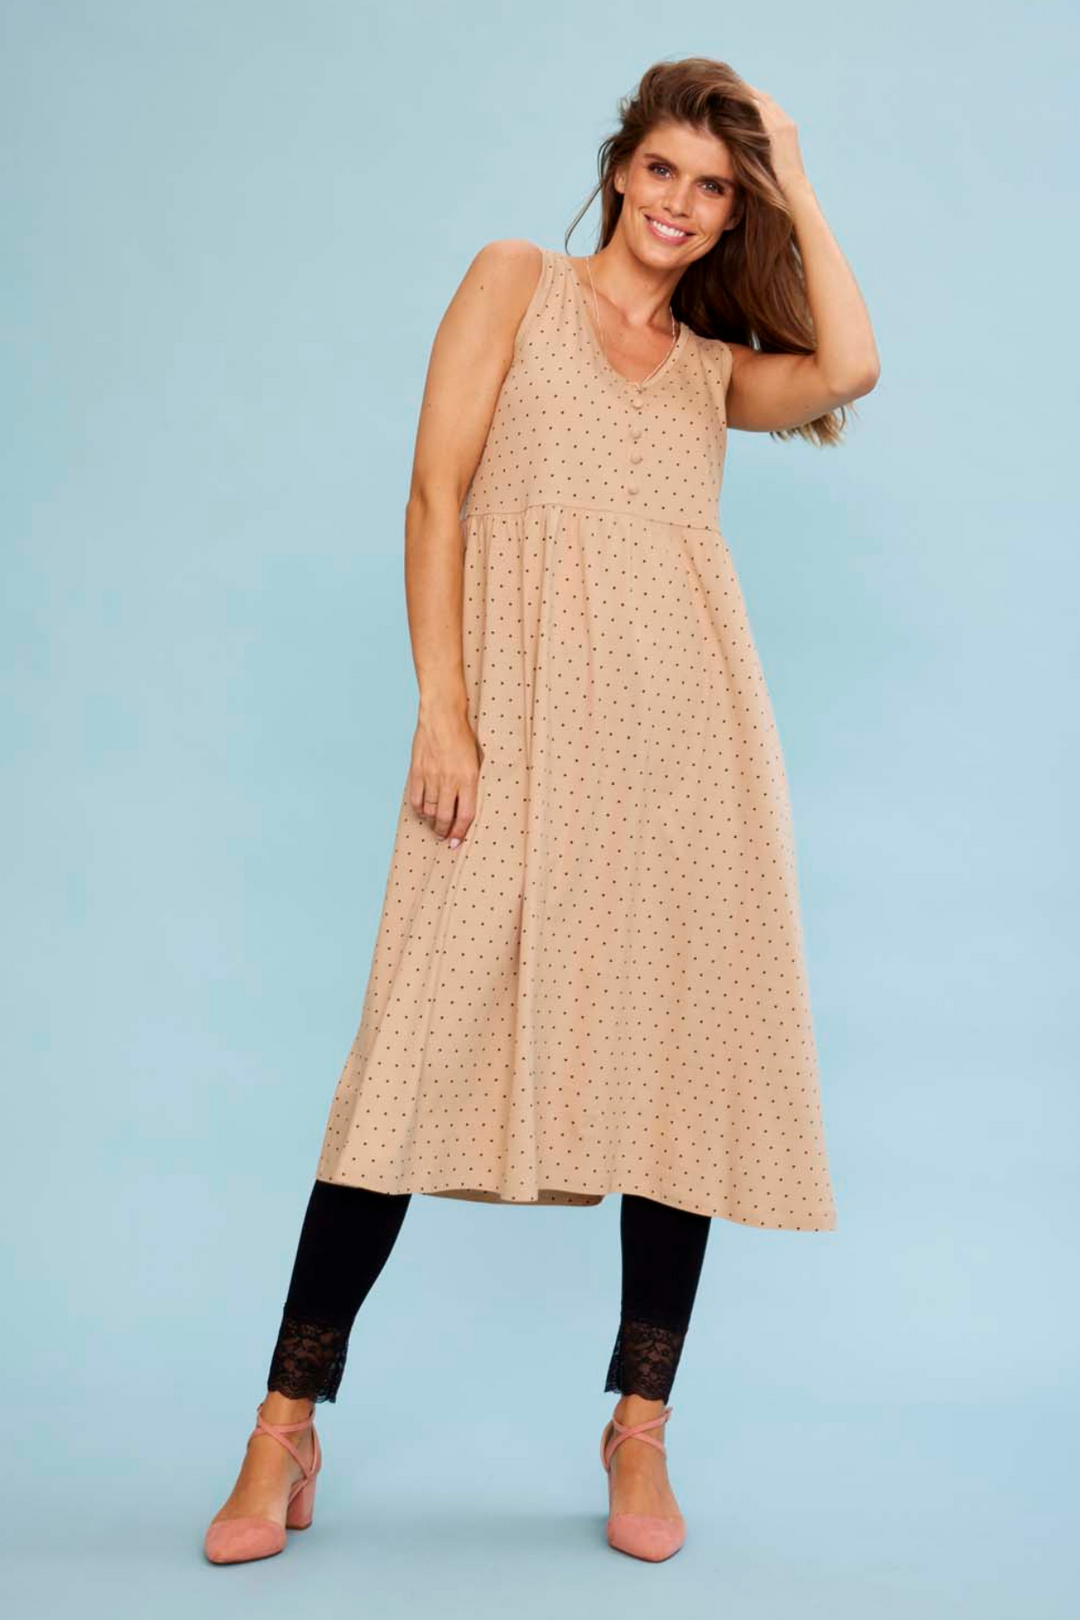 Ferah 173 - Sand-colored Dress with Black Dots - Timeless design with elegant finish | ZE-ZE|